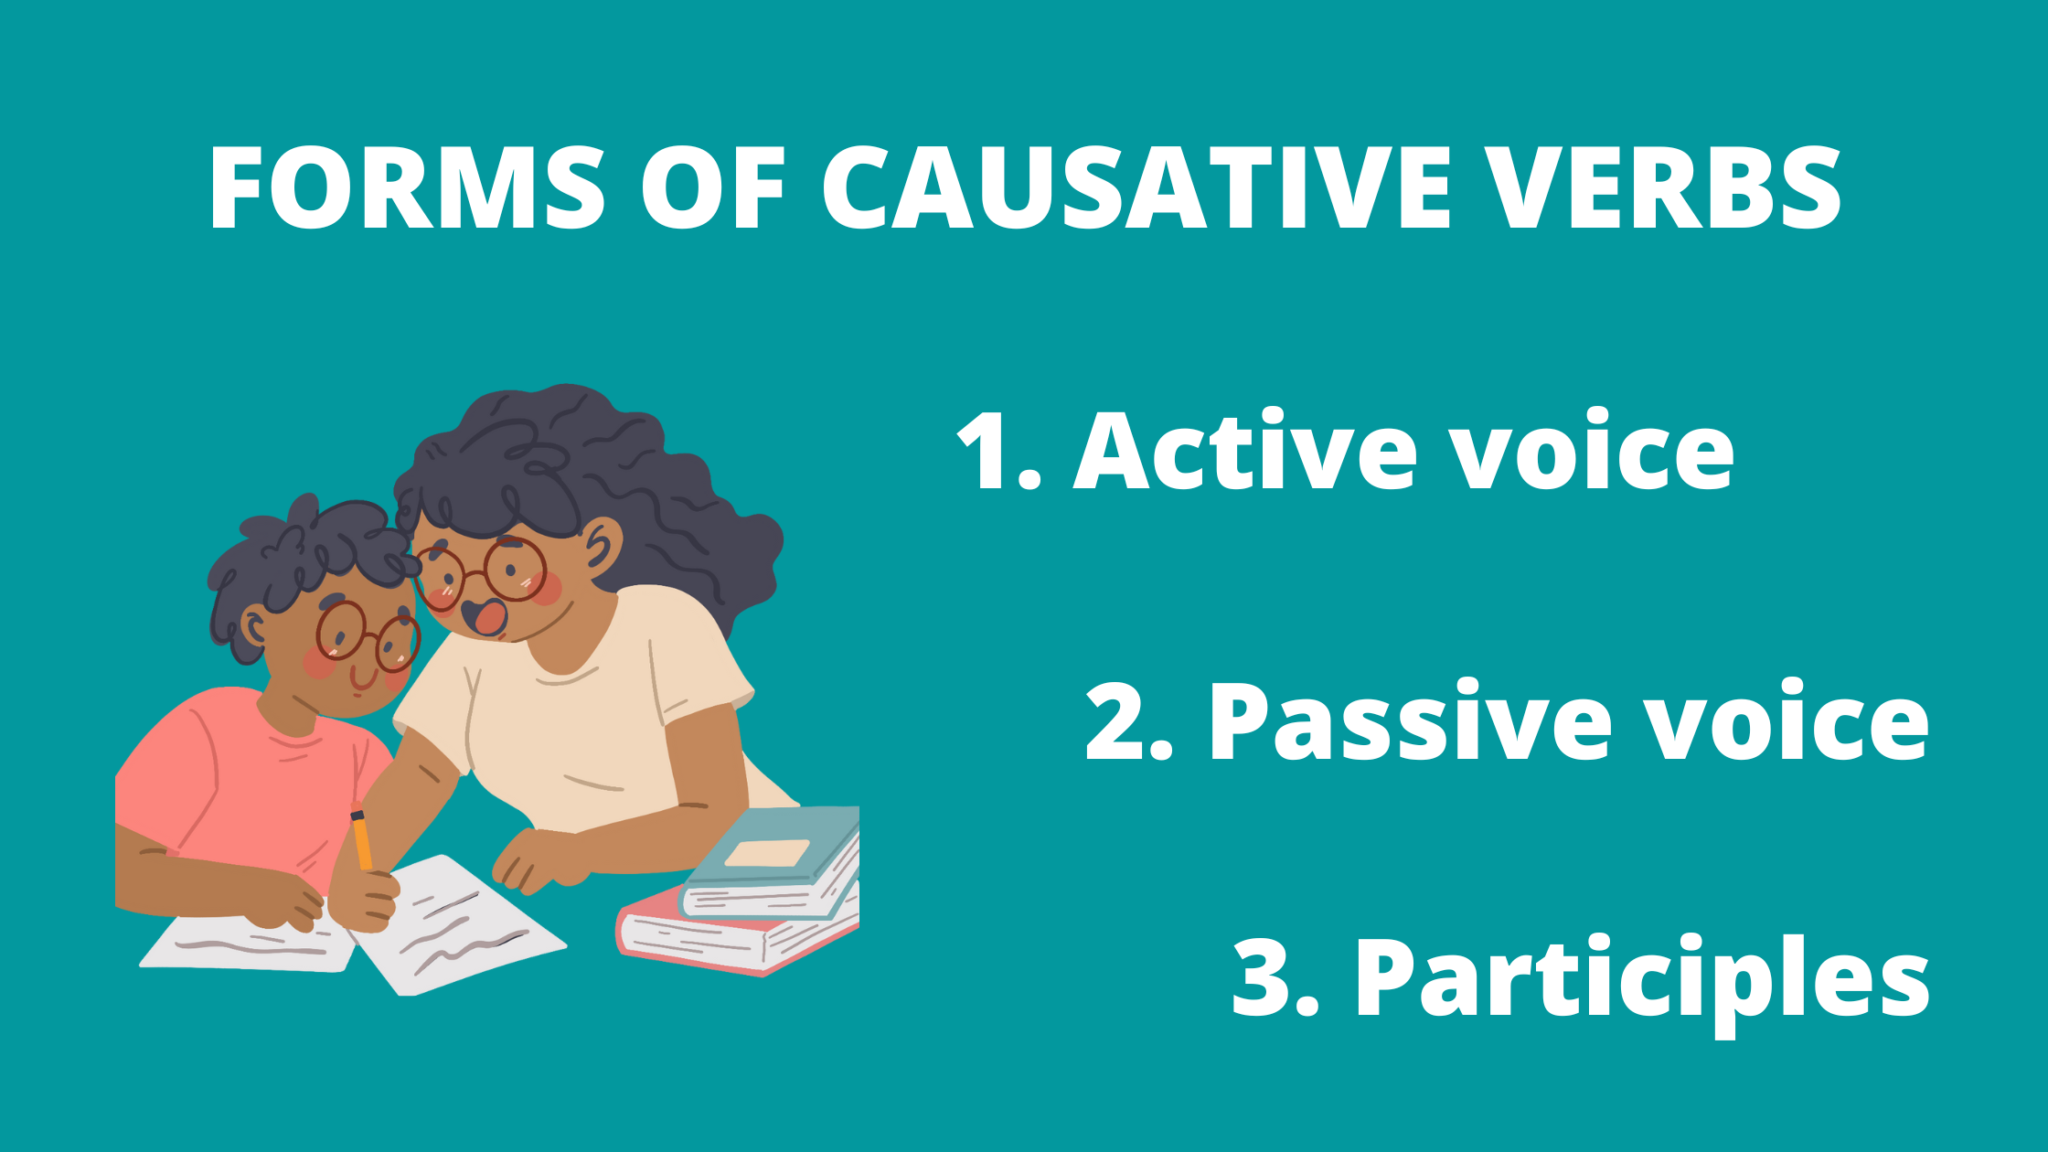 What Is The Meaning Of Causative Verb